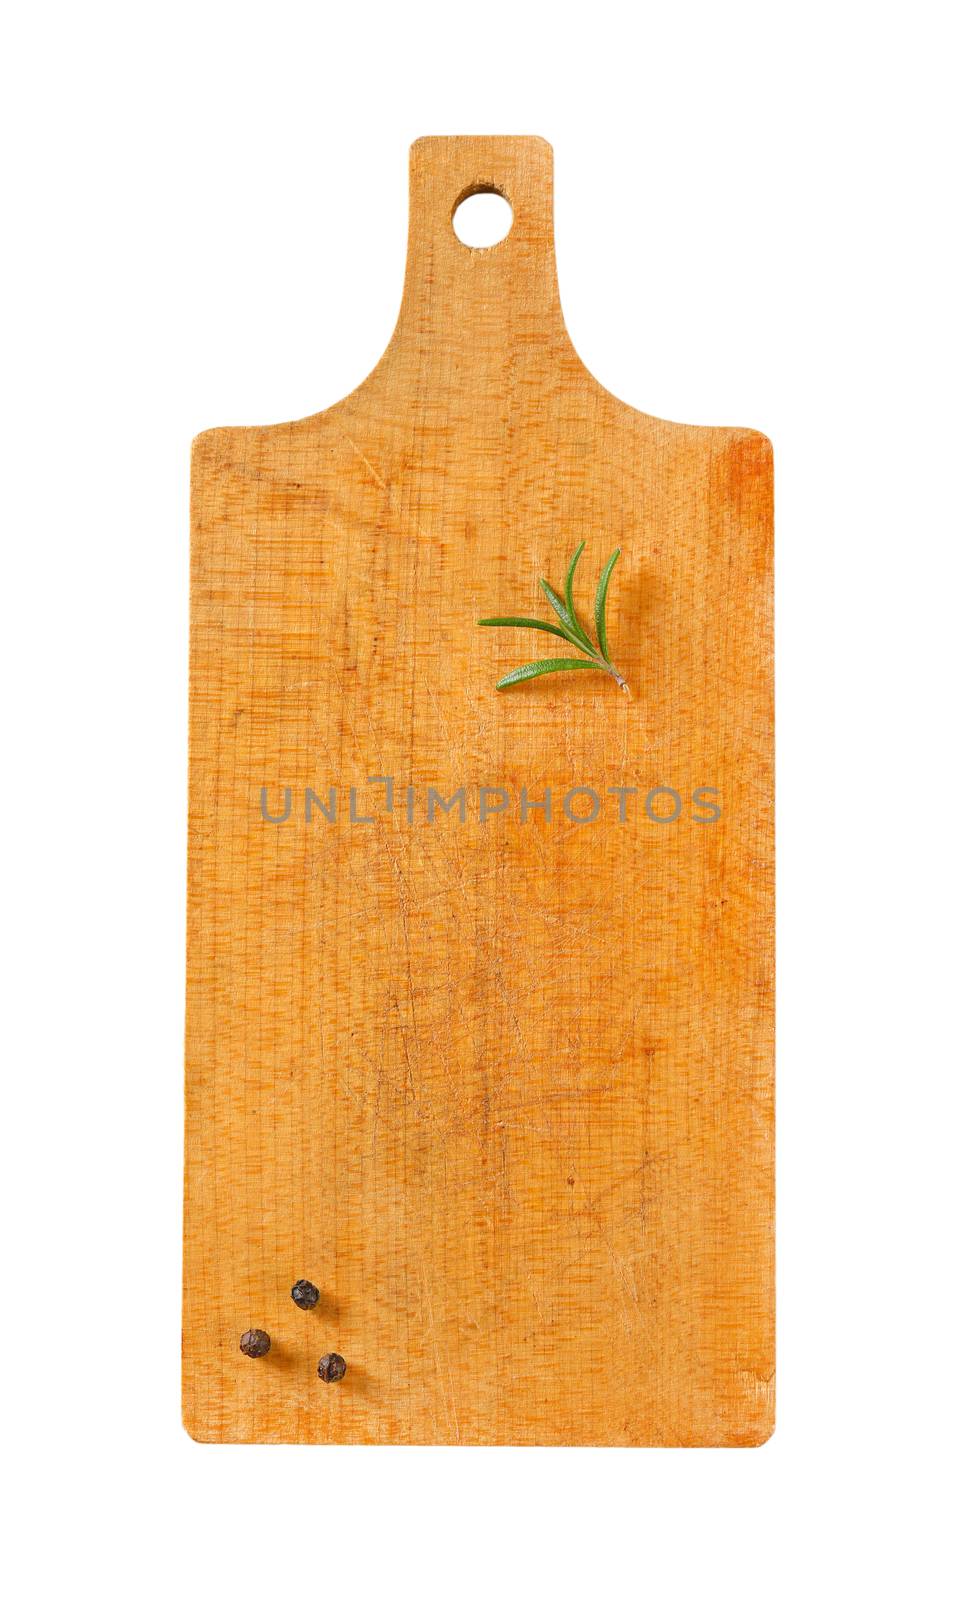 Wooden cutting board with rosemary and black peppercorns on it